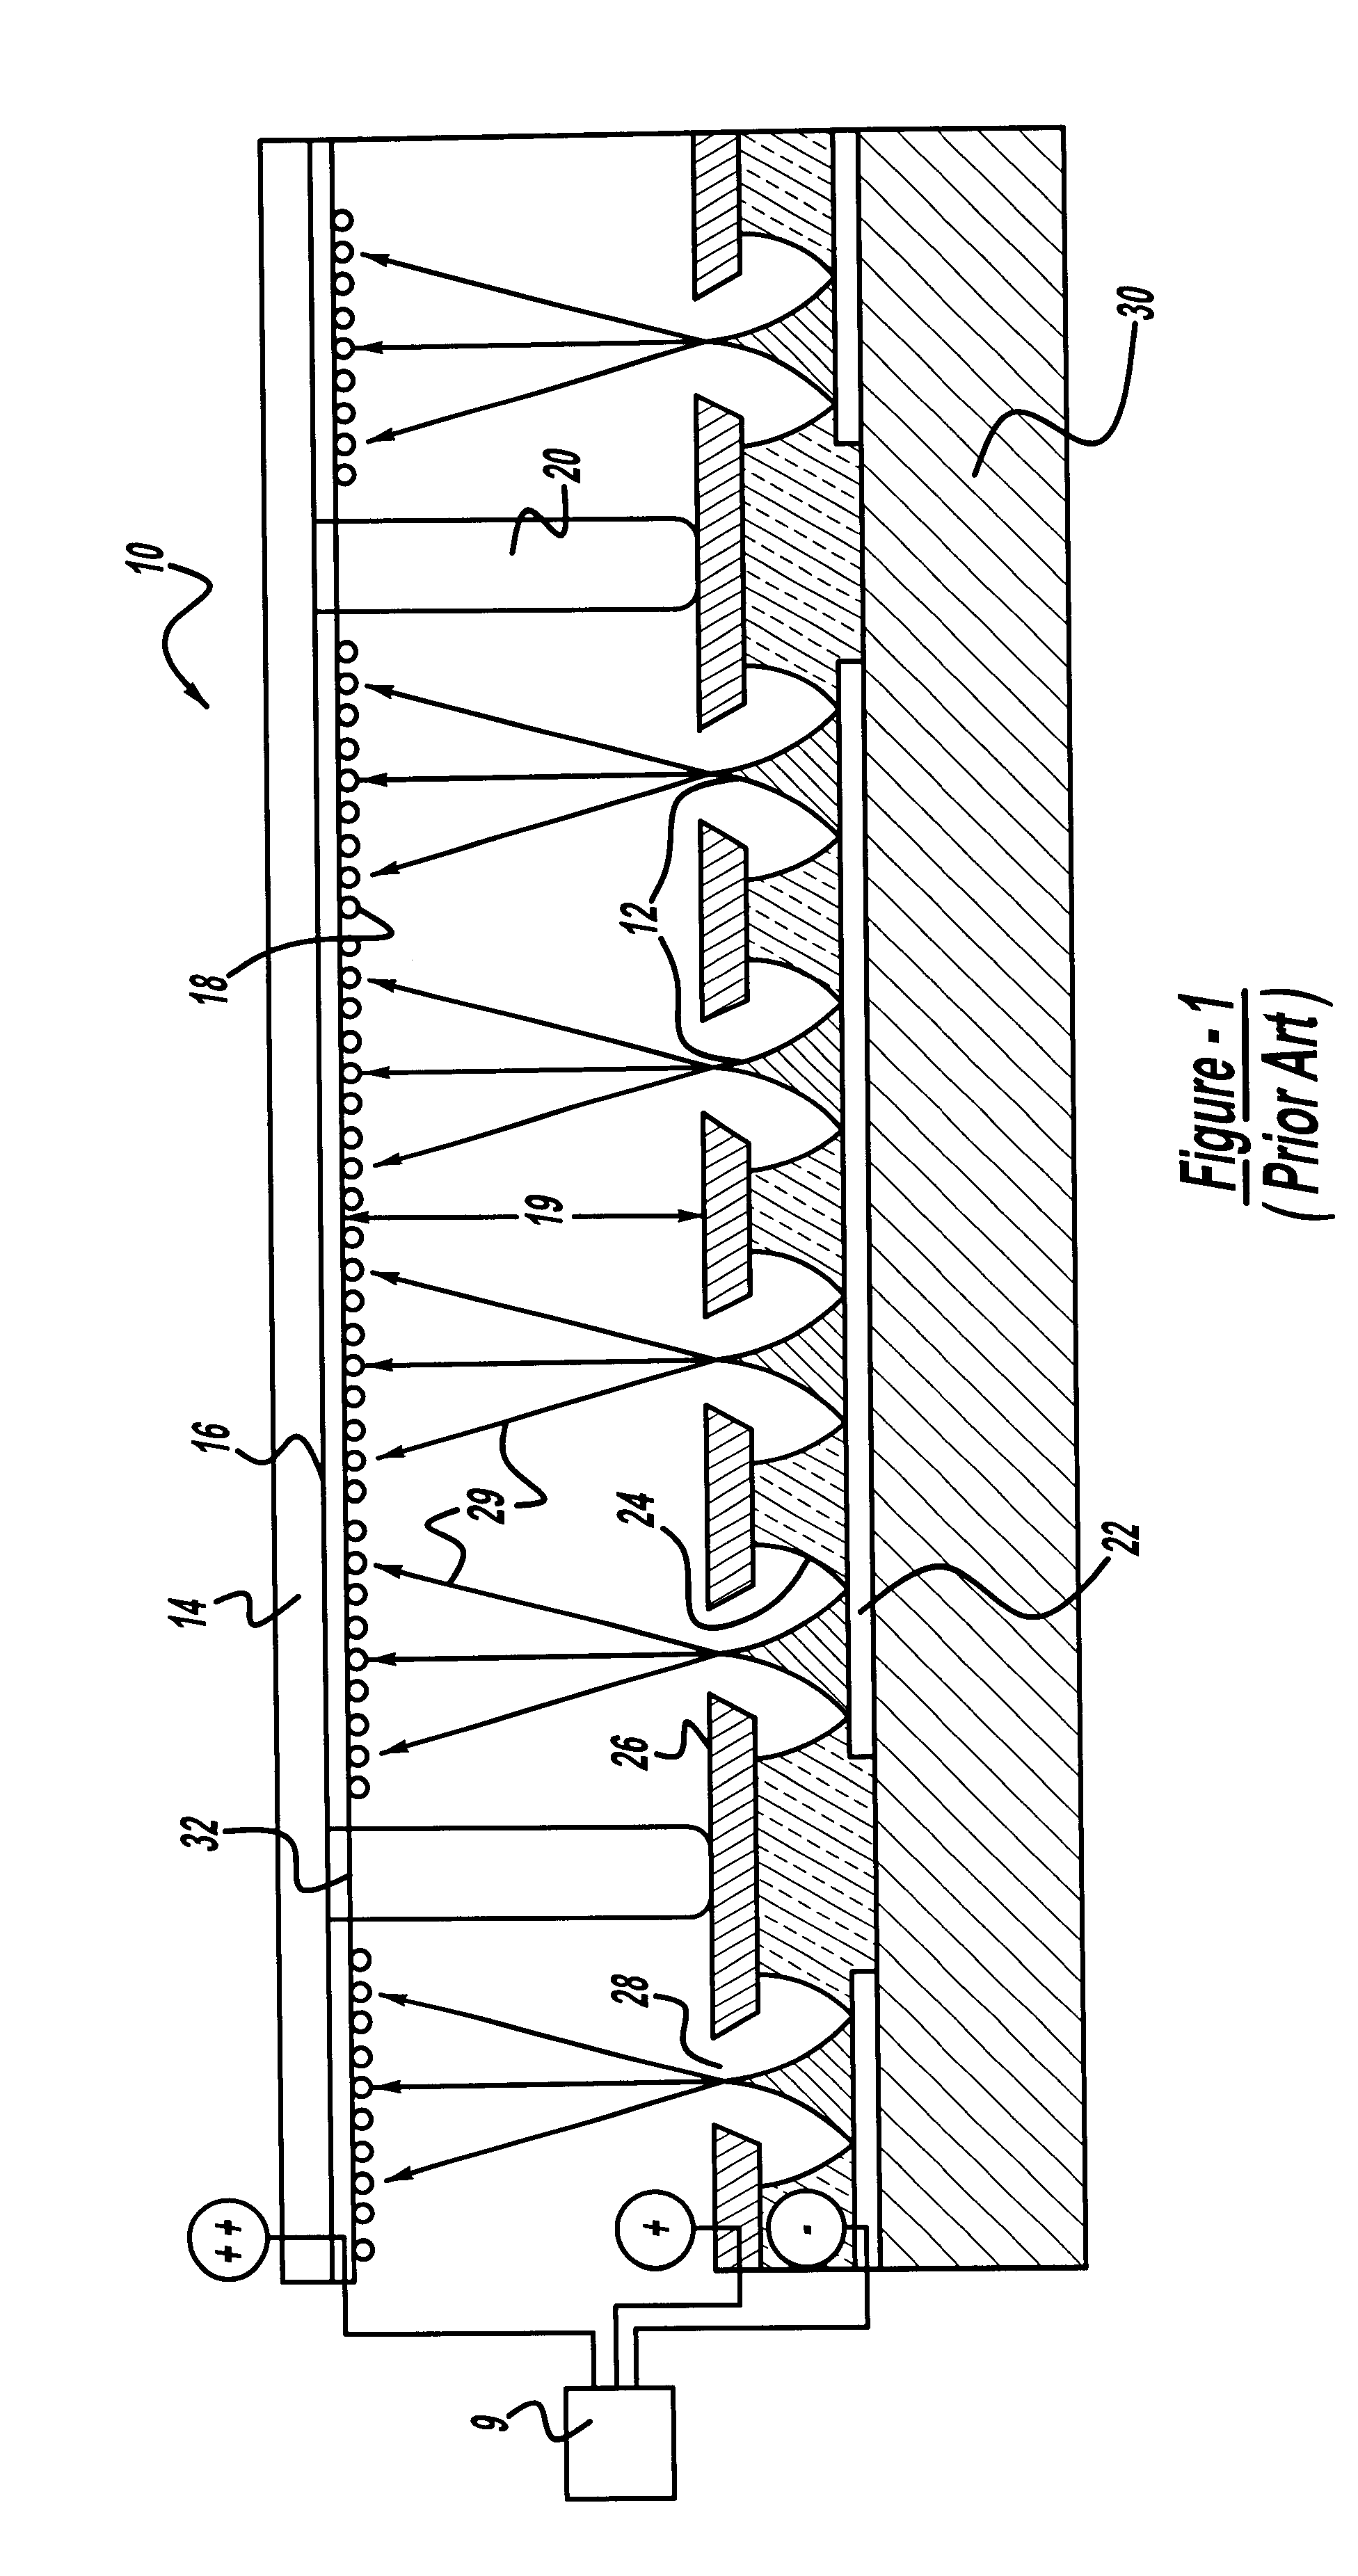 Electron amplification channel structure for use in field emission display devices